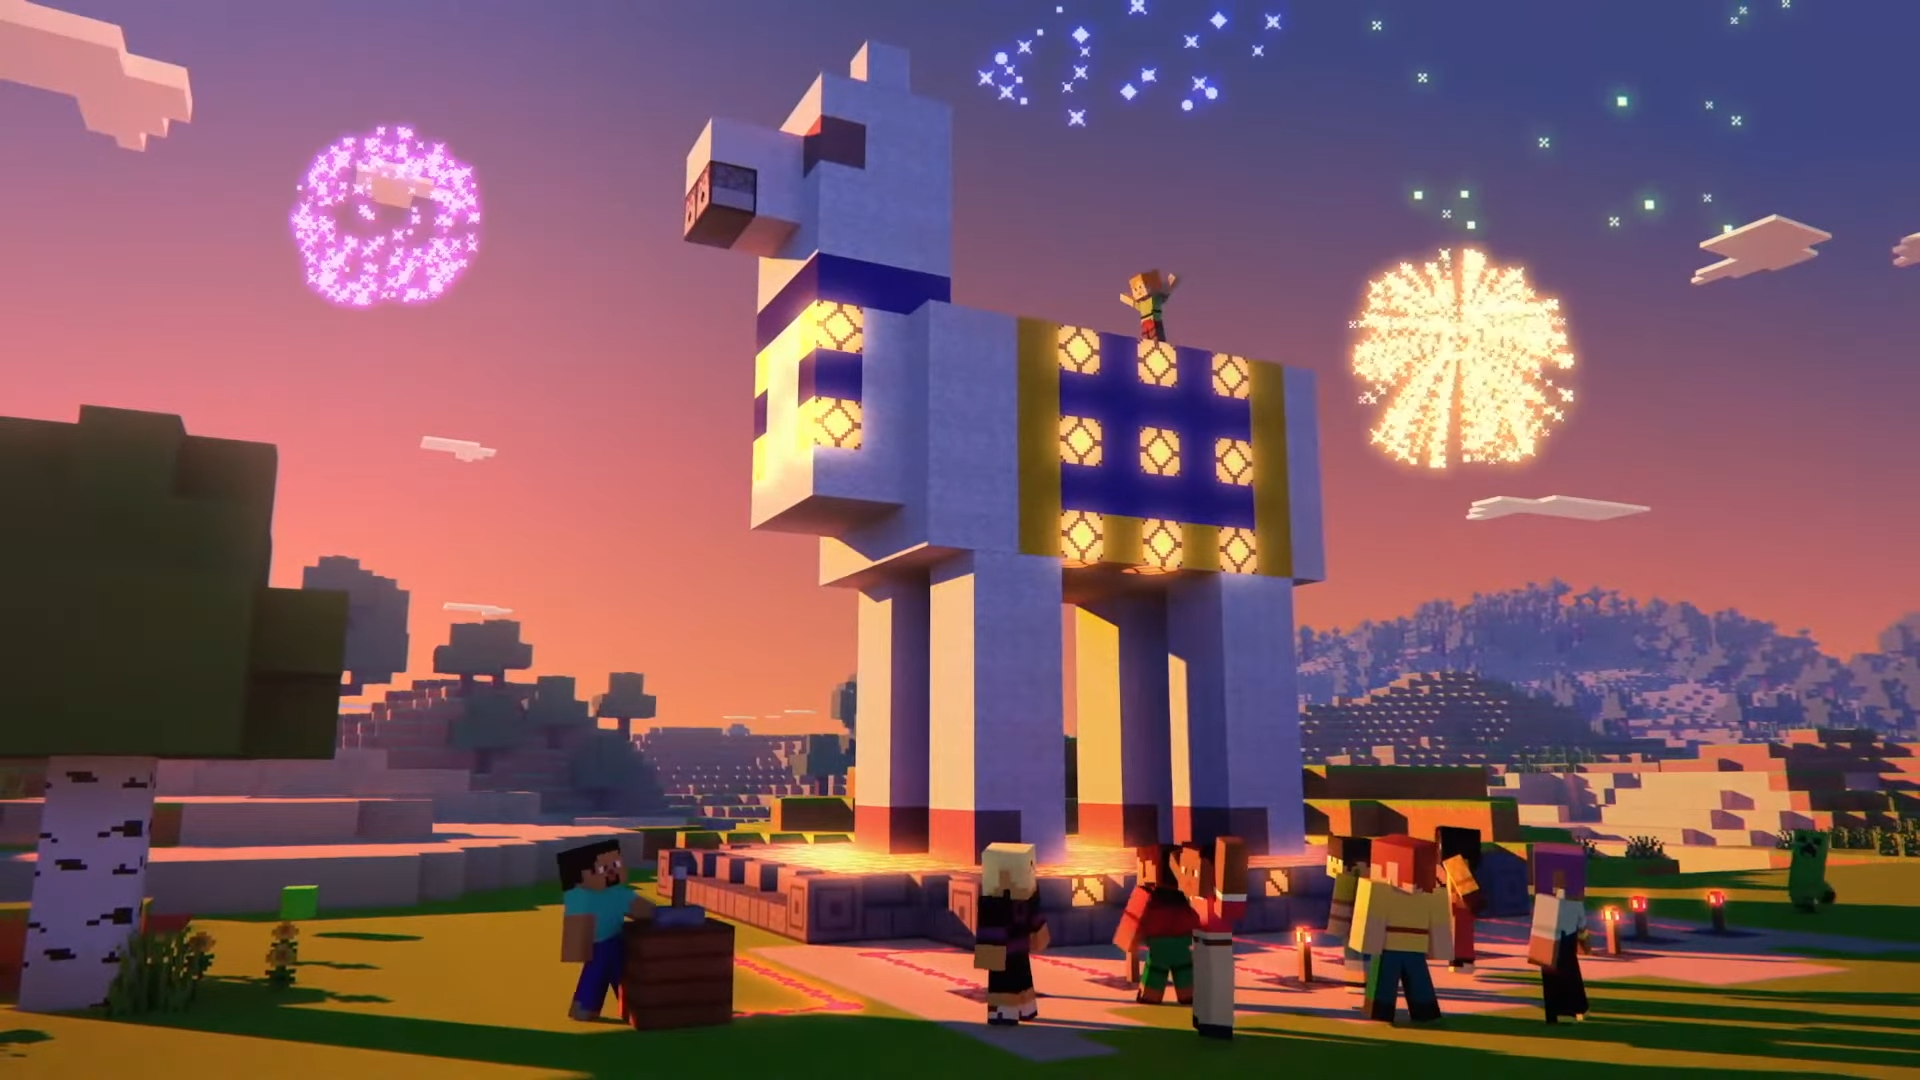 Minecraft 1.20: Every new feature announced so far